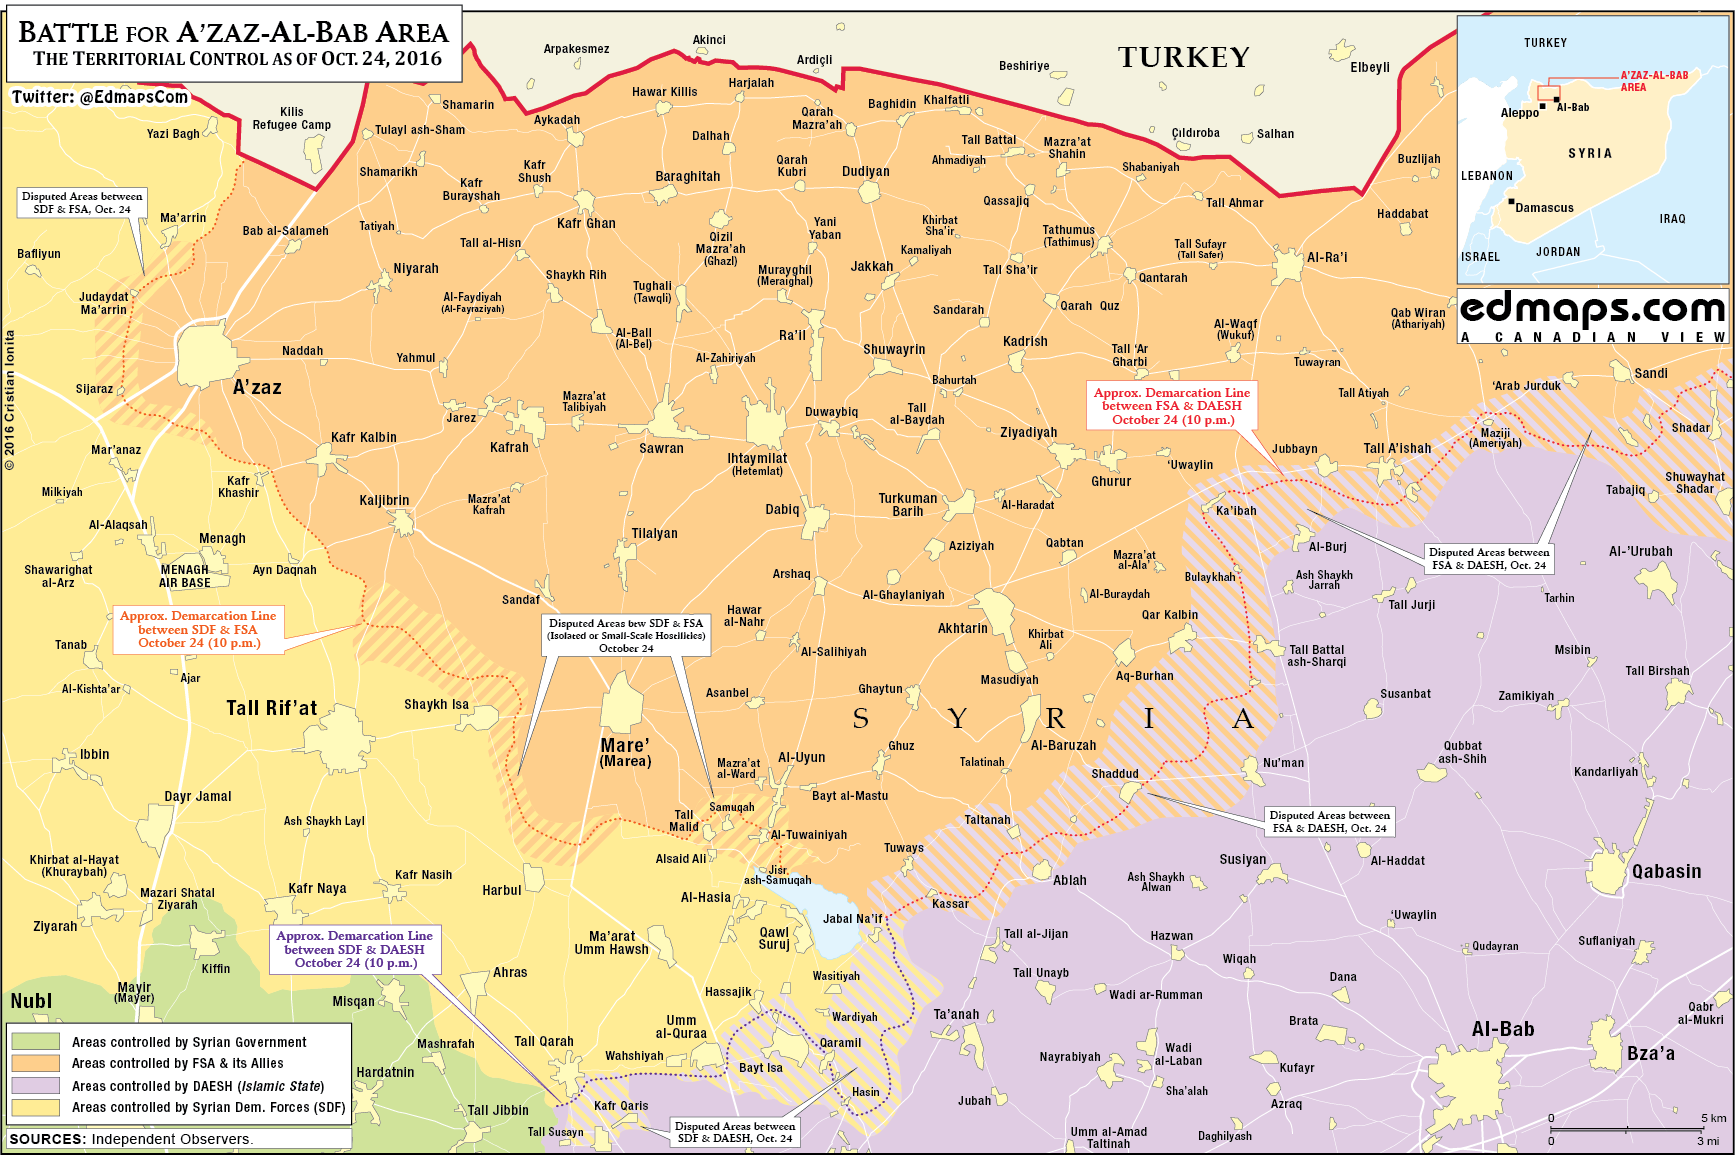 Turkey-backed Militants Temporarly Stopped Advance on Kurdish YPG in Northern Syria due to "International Reasons"